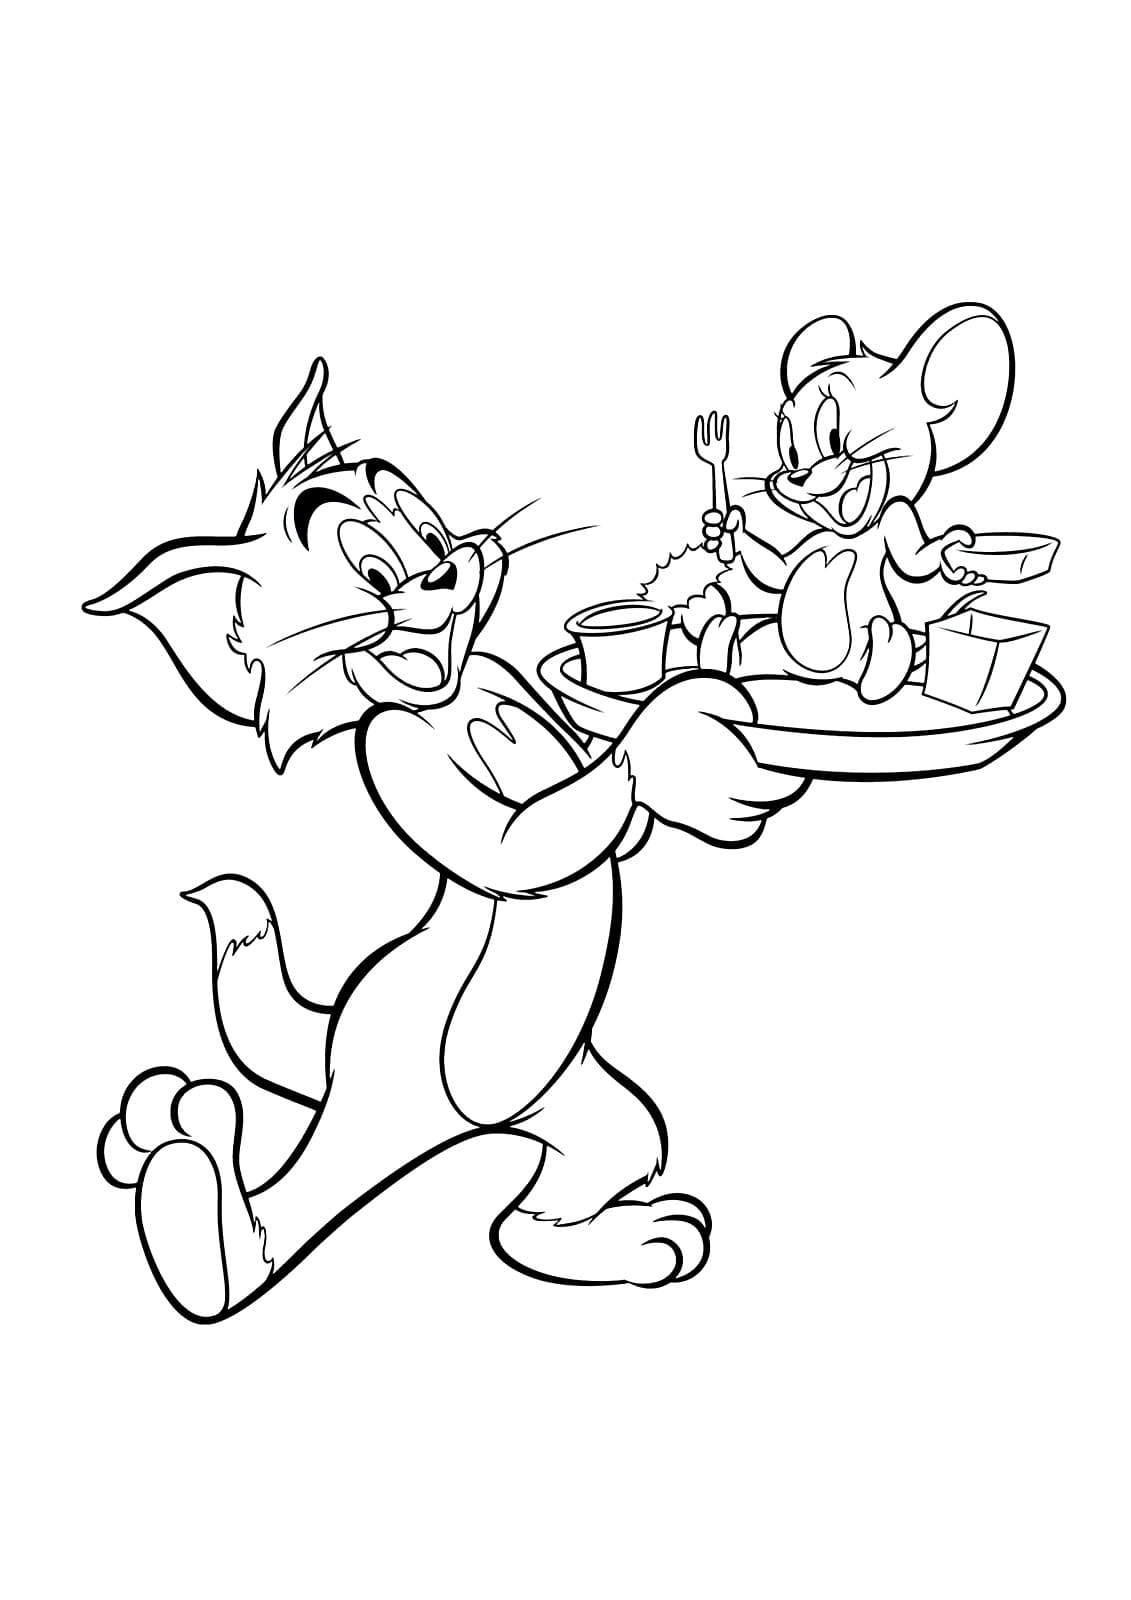 Tom And Jerry Coloring Pages 100 Free Coloring Pages - vrogue.co